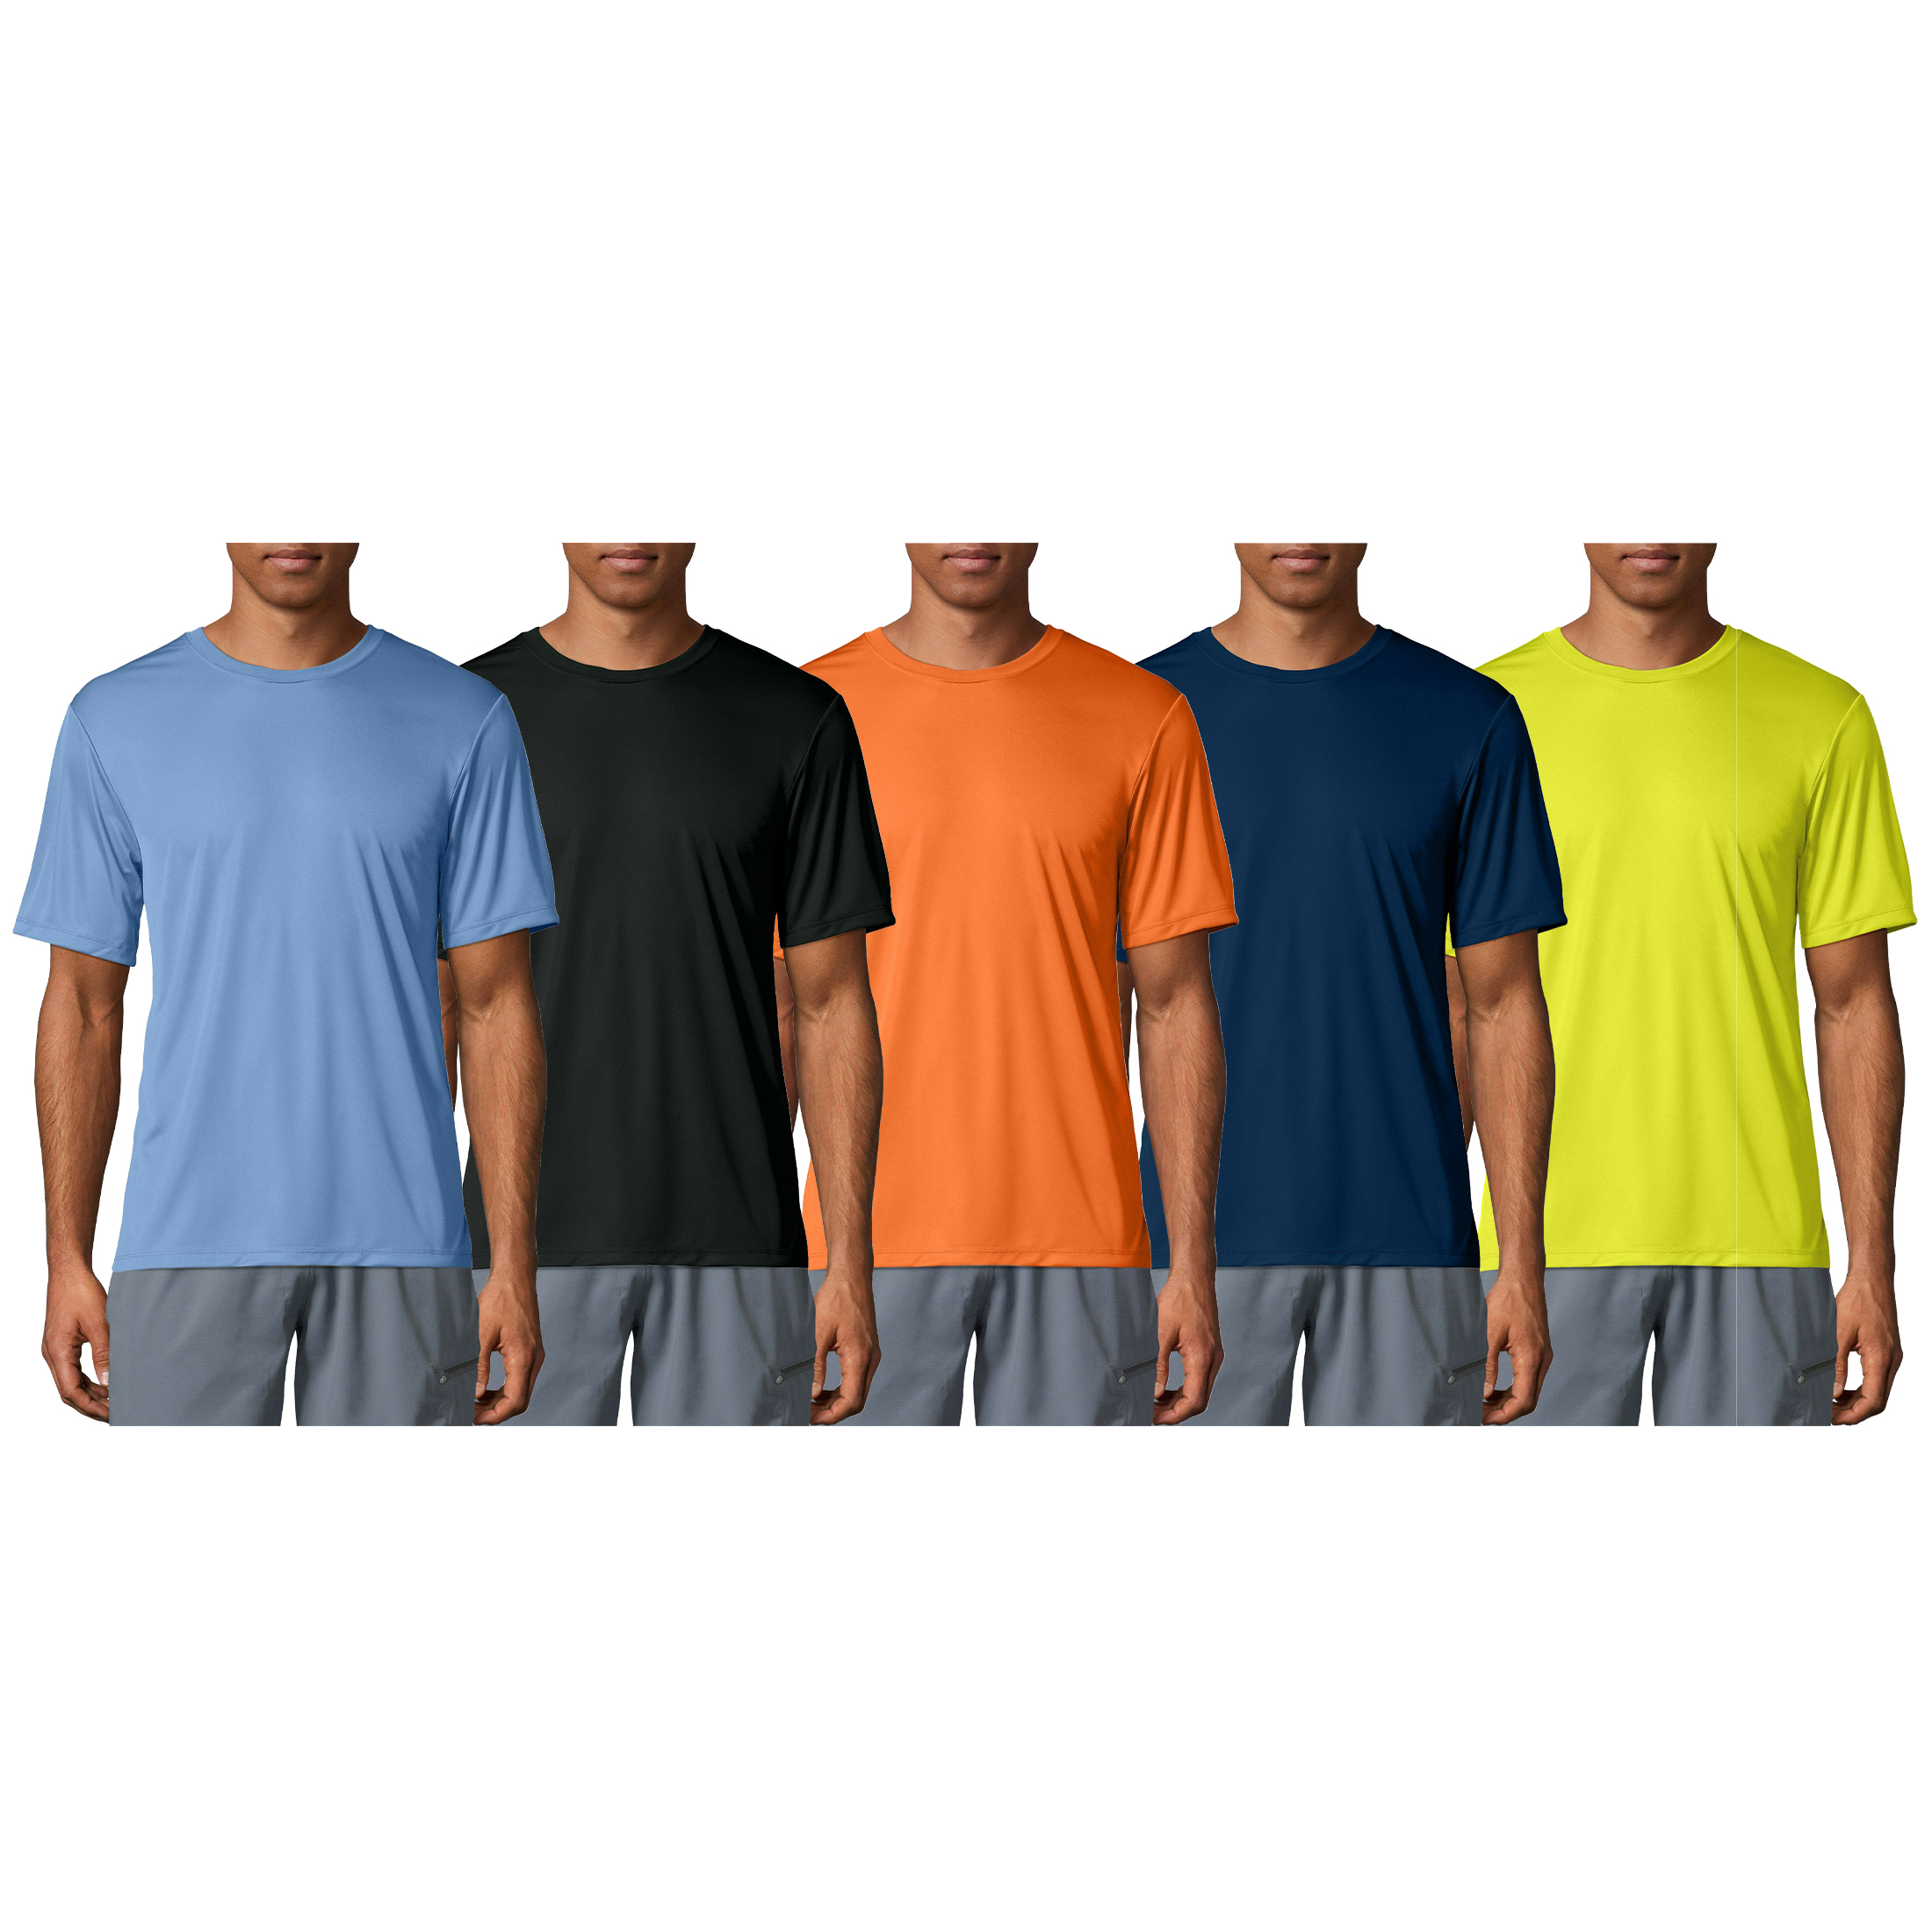 3-Pack Men's Cool Dri-Fit Short Sleeve T-Shirt Solid Color Moisture-Wicking Tee UPF 50+ UV Protection Round/Crew Neck Quick-Dry Active Wear